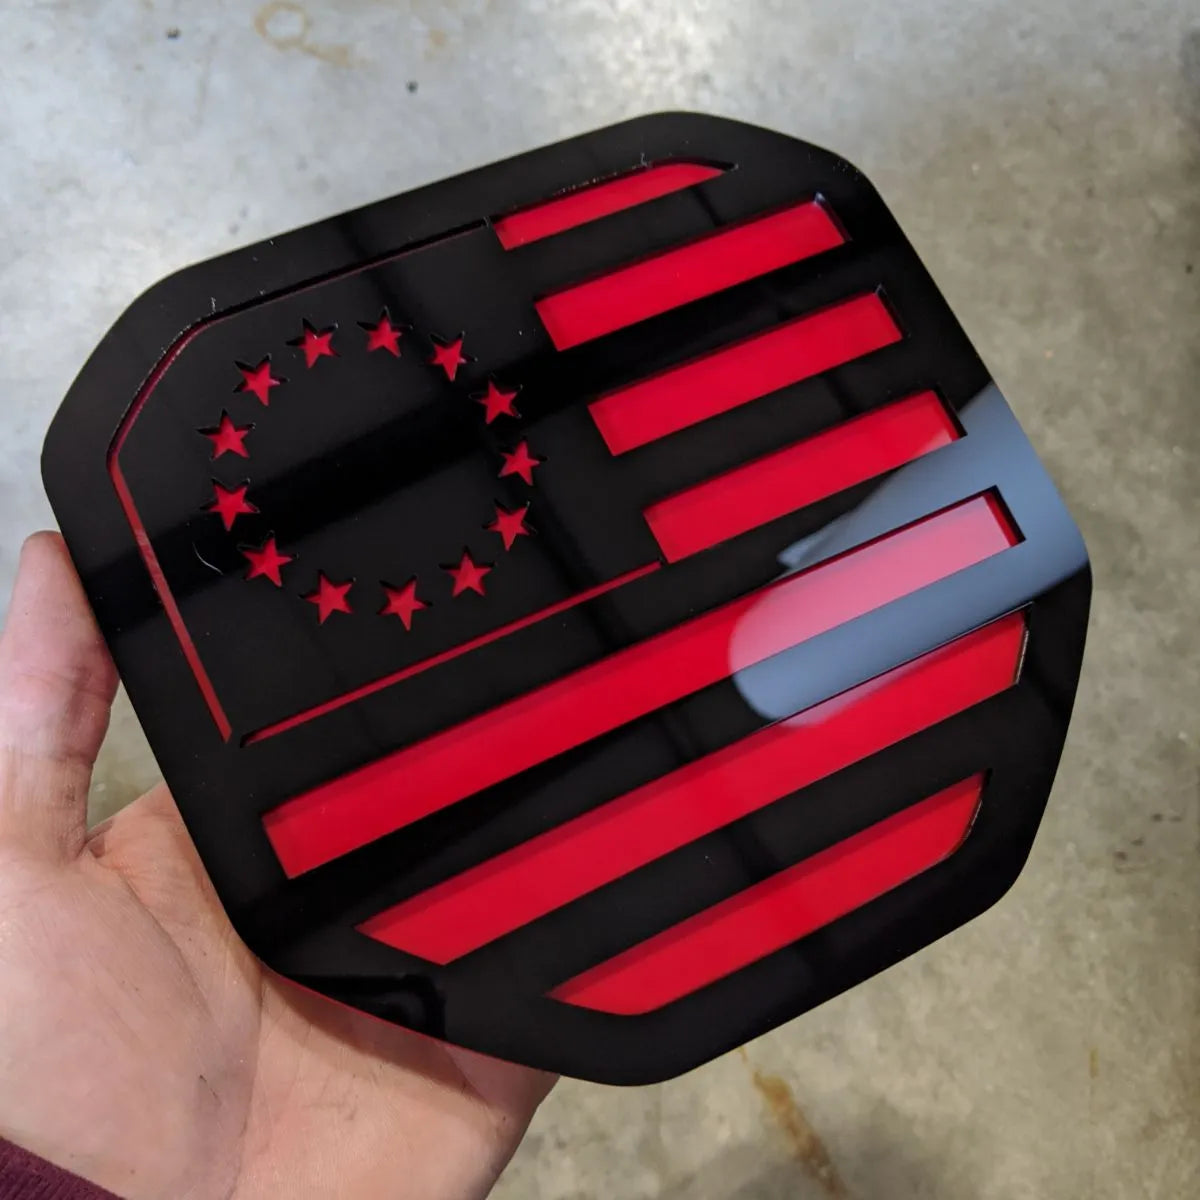 Betsy Ross American Flag Badge - Fits 2019-2023 (5th Gen) Dodge® Ram® Tailgate -1500, 2500, 3500 - Black on Red